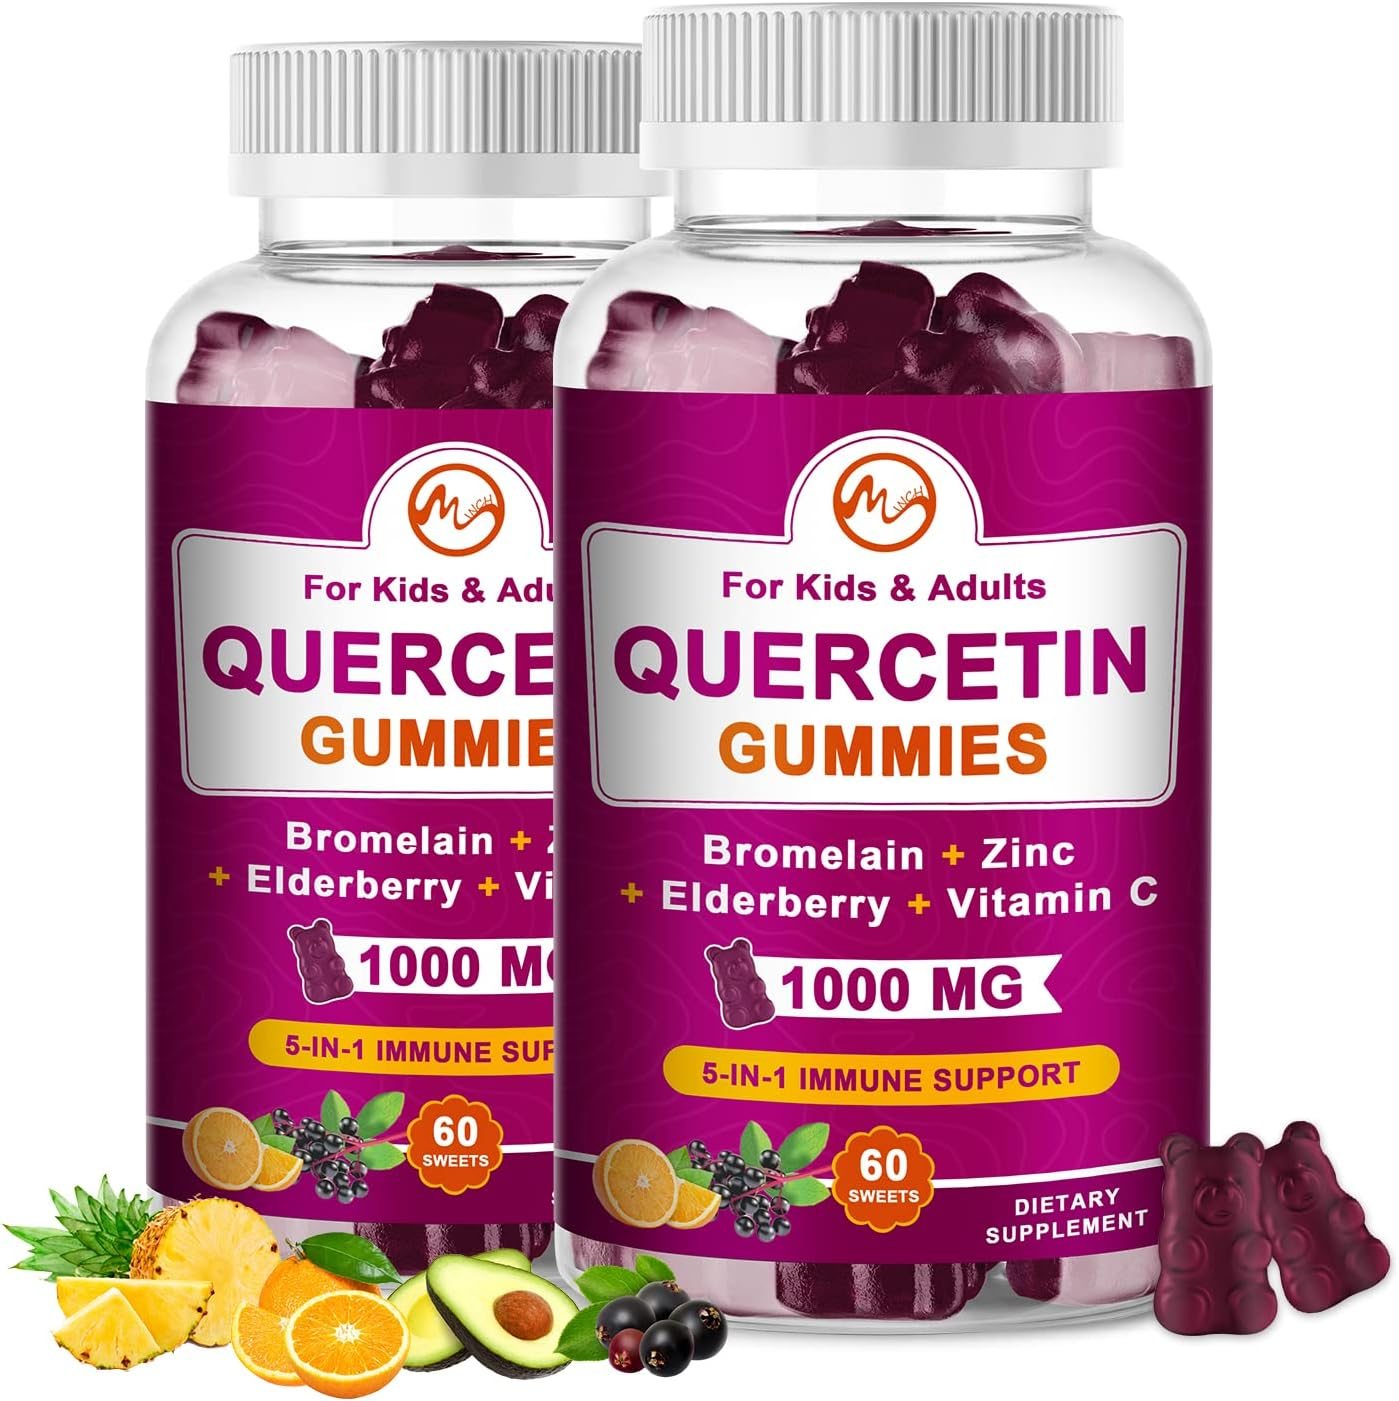 Quercetin Gummies with Bromelain, Elderberry, Zinc and Vitamin C - Chewable Quercetin 1000mg Supplement for Immunity, Cardiovascular, Allergy, Aging Support - Vegan Gummies for Adult & Kid